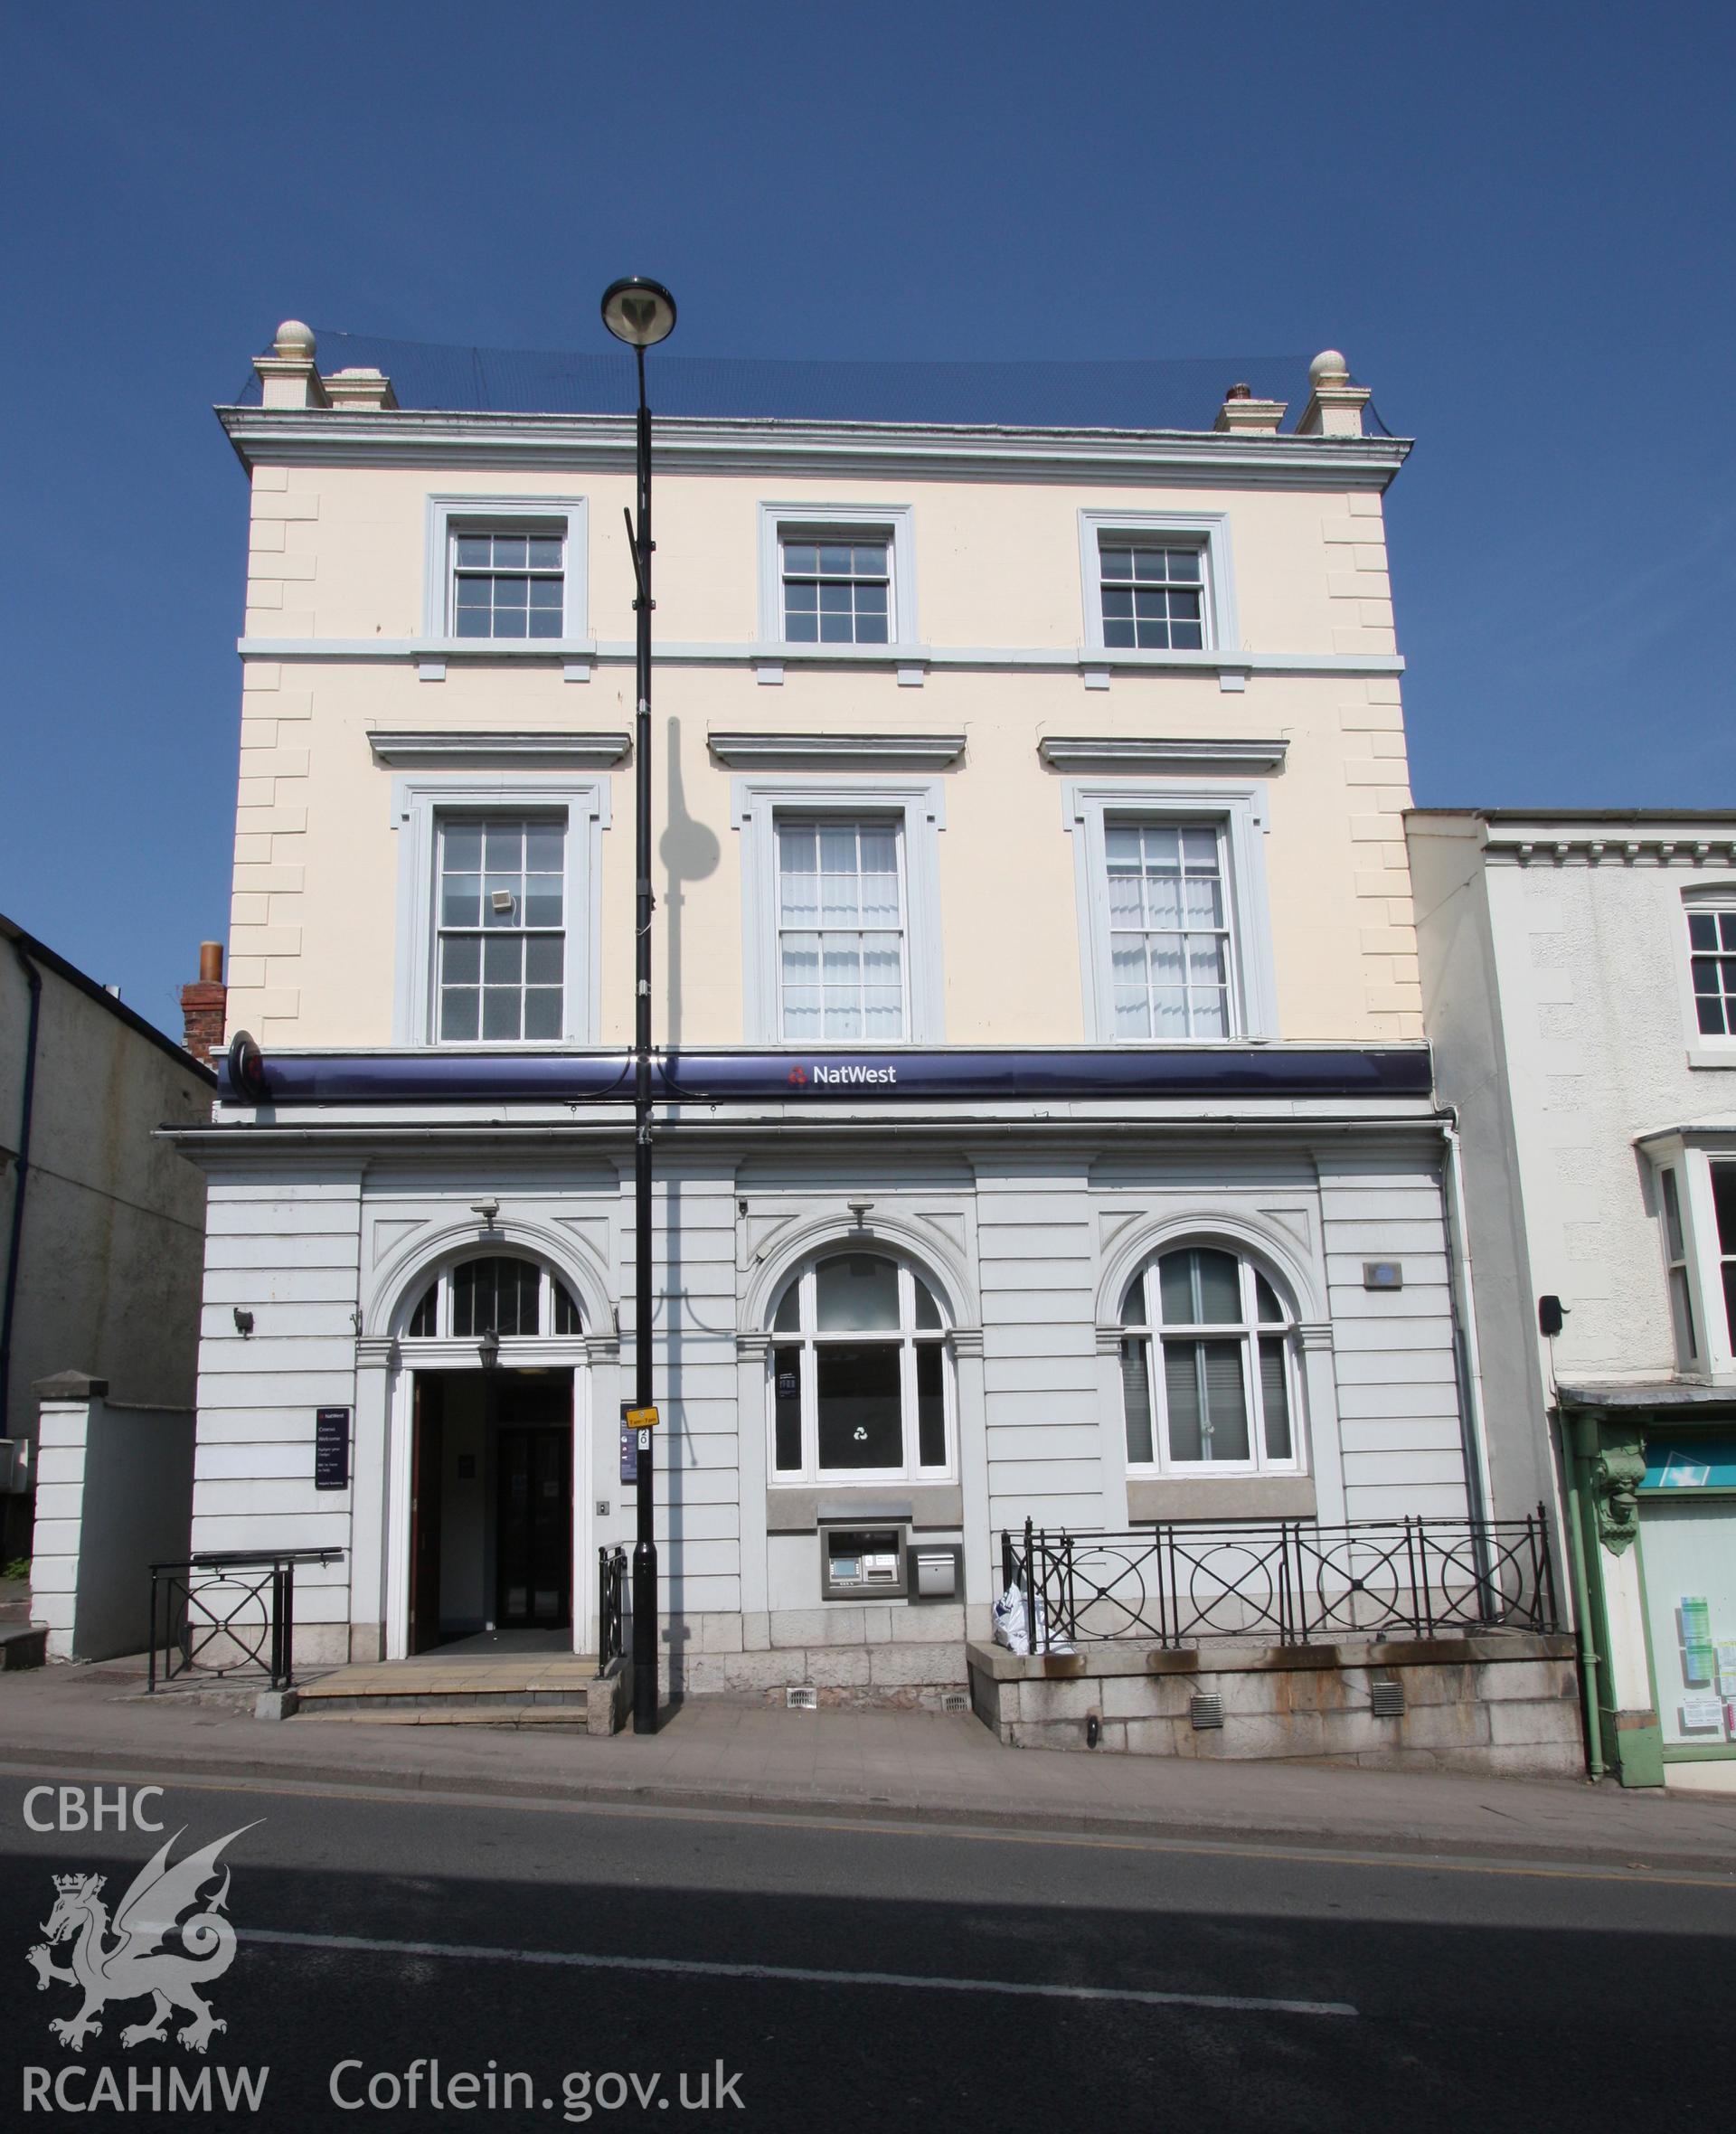 Colour photograph showing exterior view of the National Westminster bank at 35 Vale Street, Denbigh. Photographed during survey conducted by Geoff Ward circa 2010.